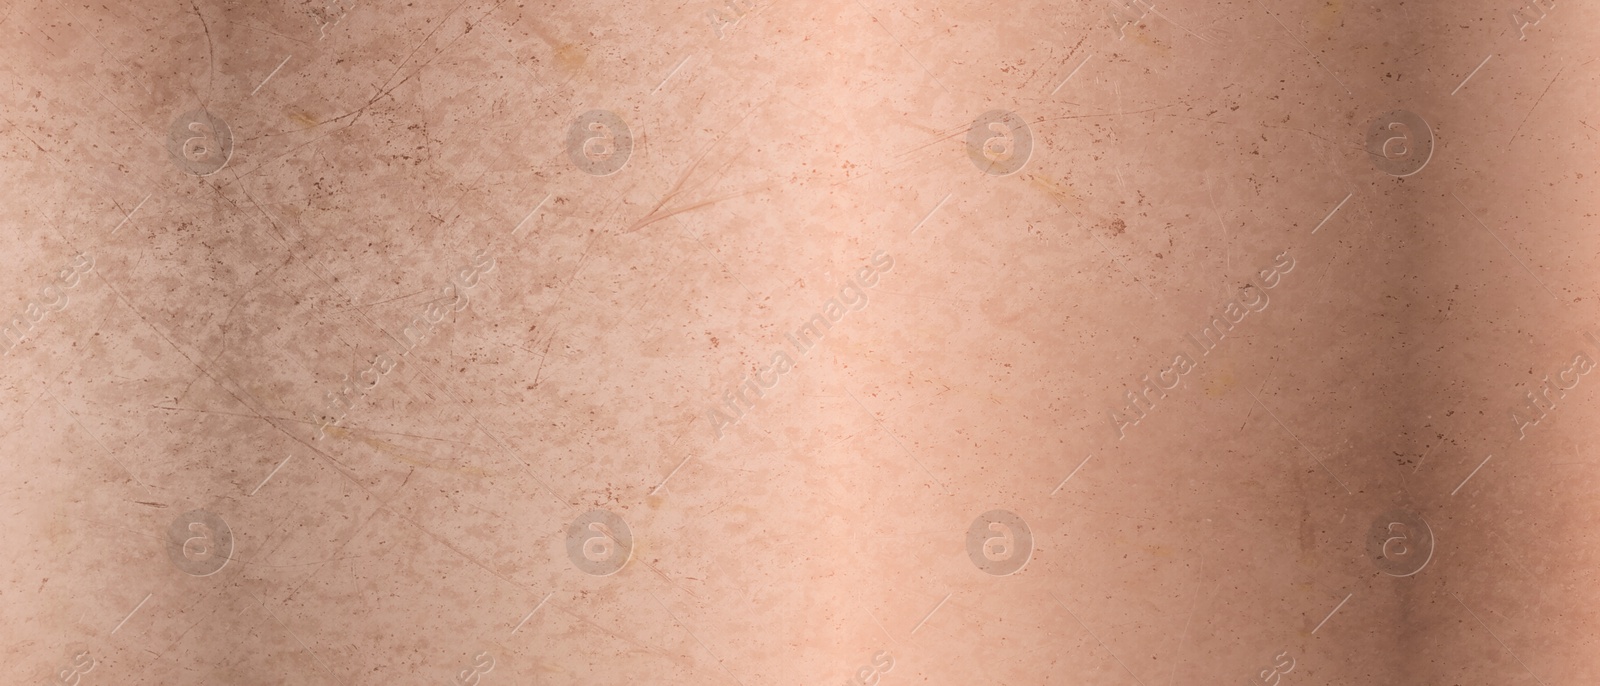 Image of Shiny bronze surface as background, closeup view